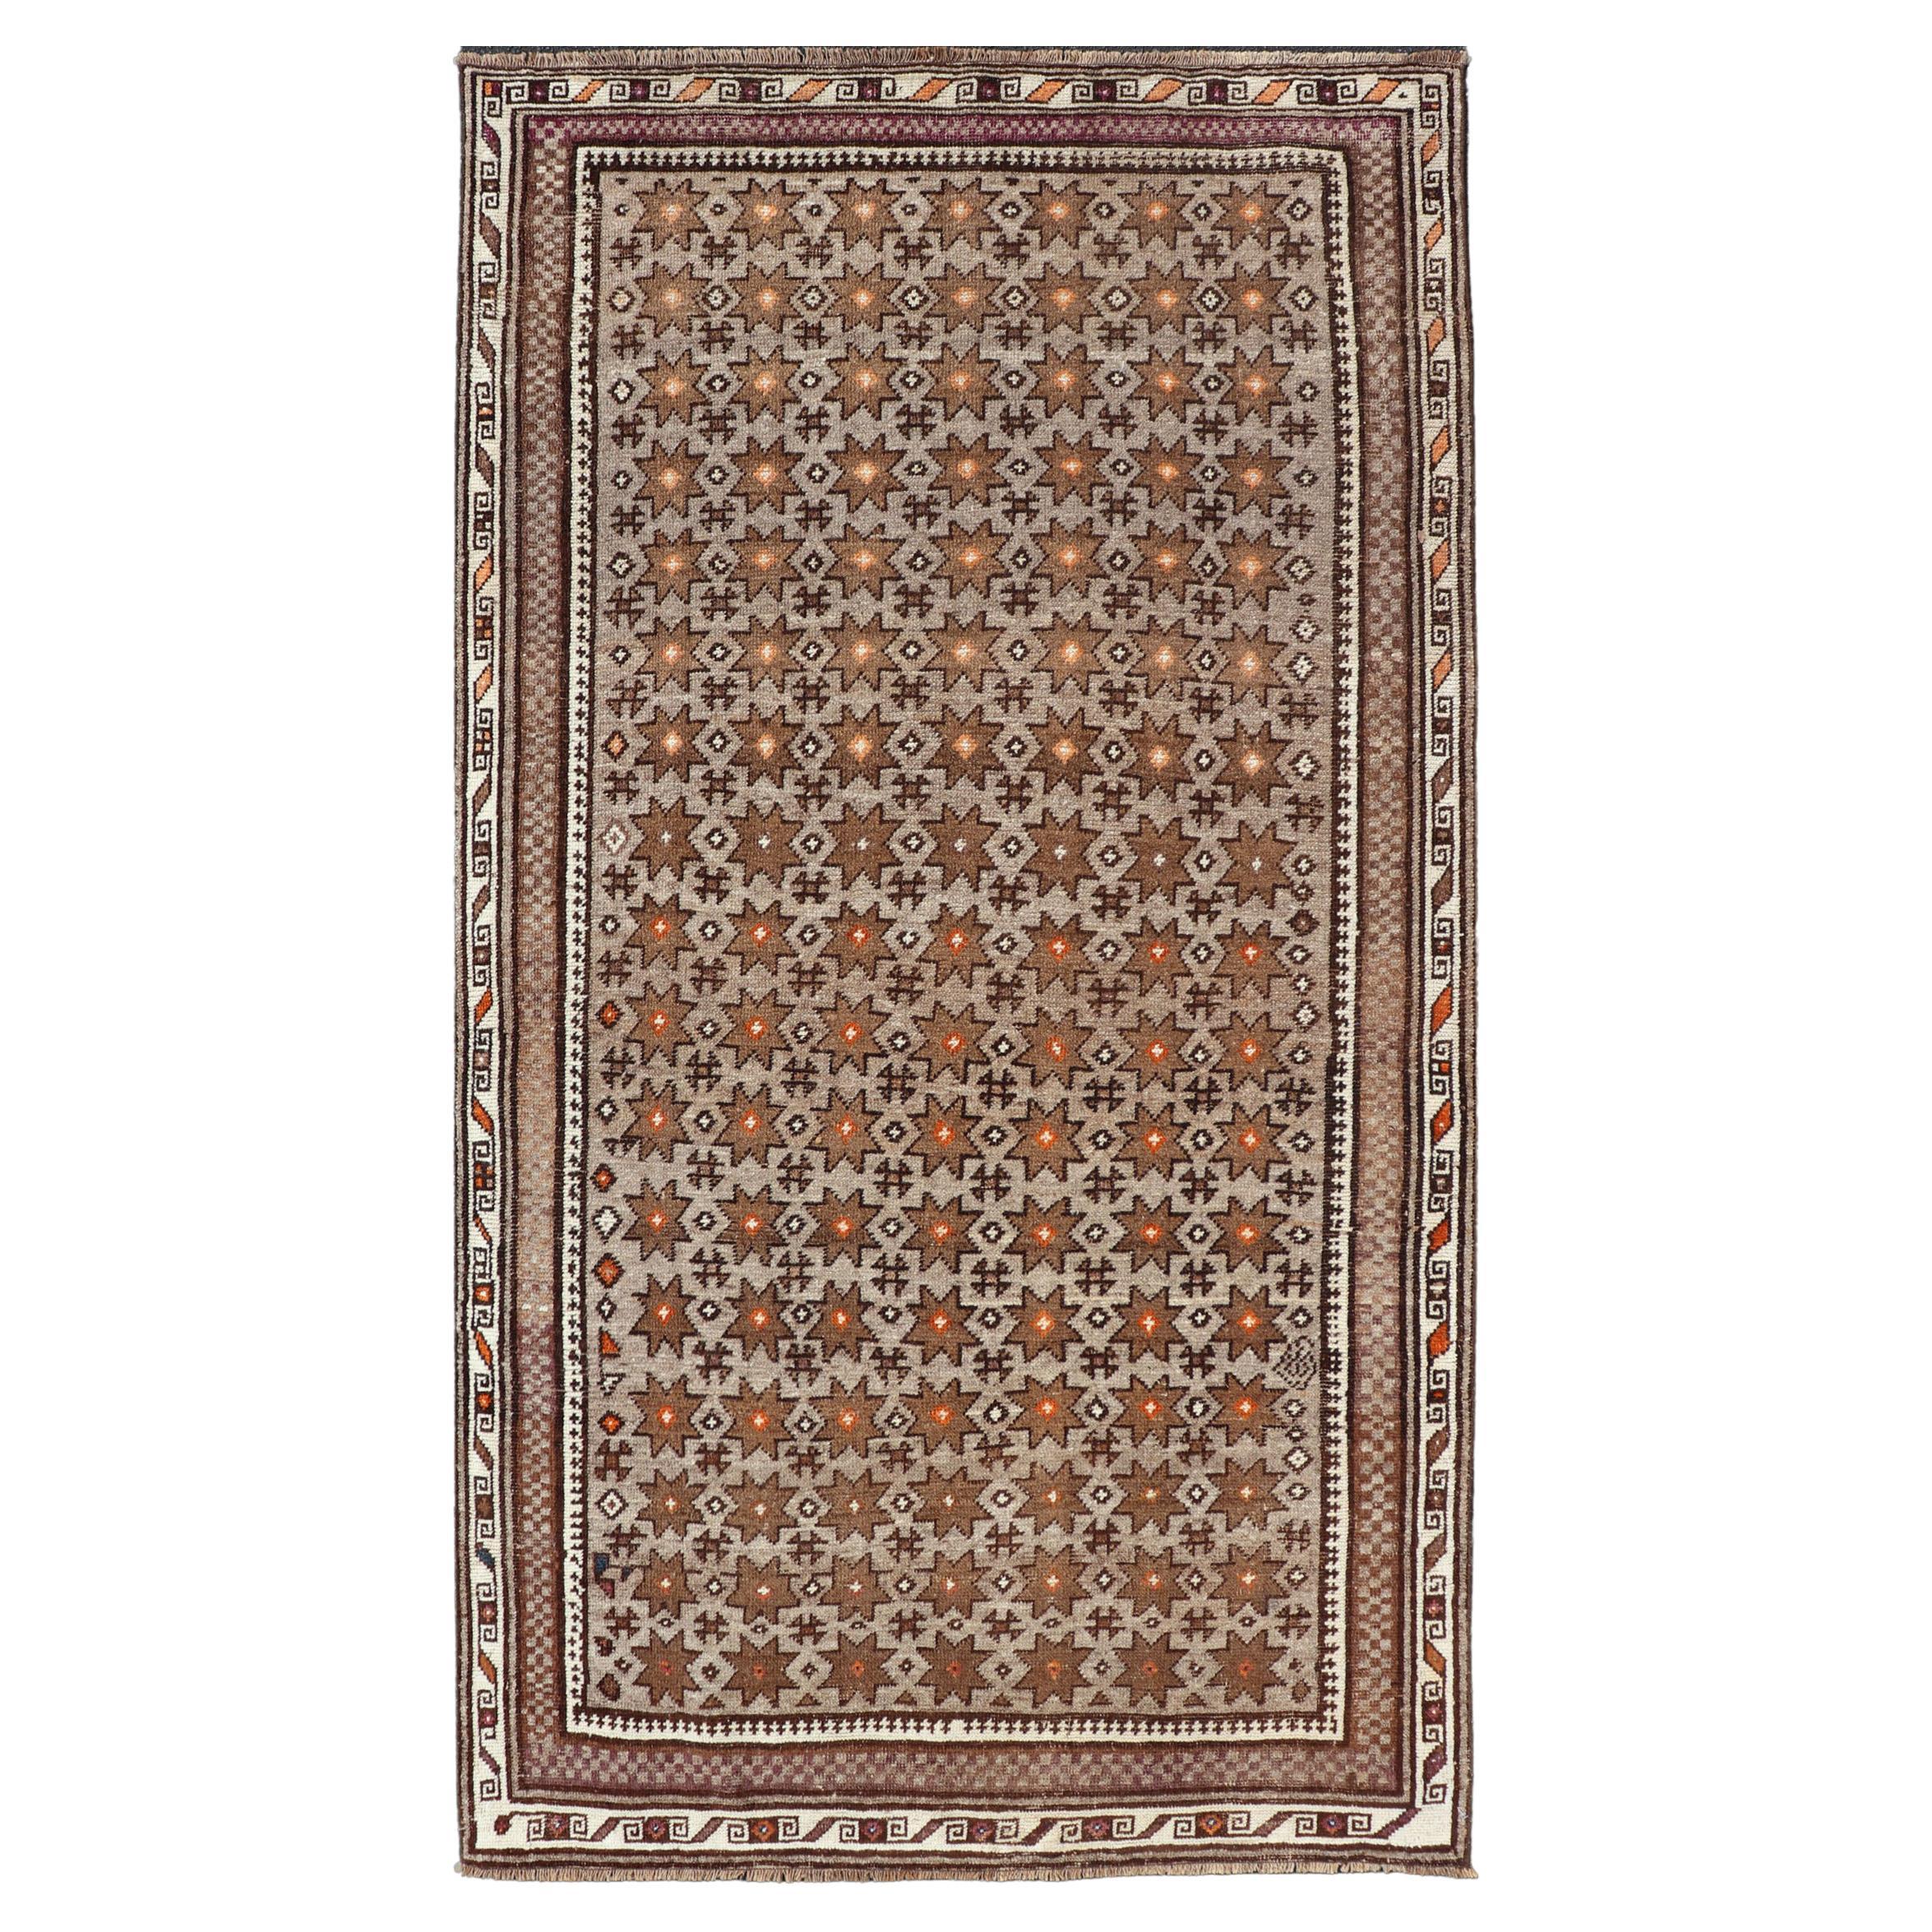 Antique Baluch Tribal Rug with Allover Geometric Diamond Design on a Grey Ground